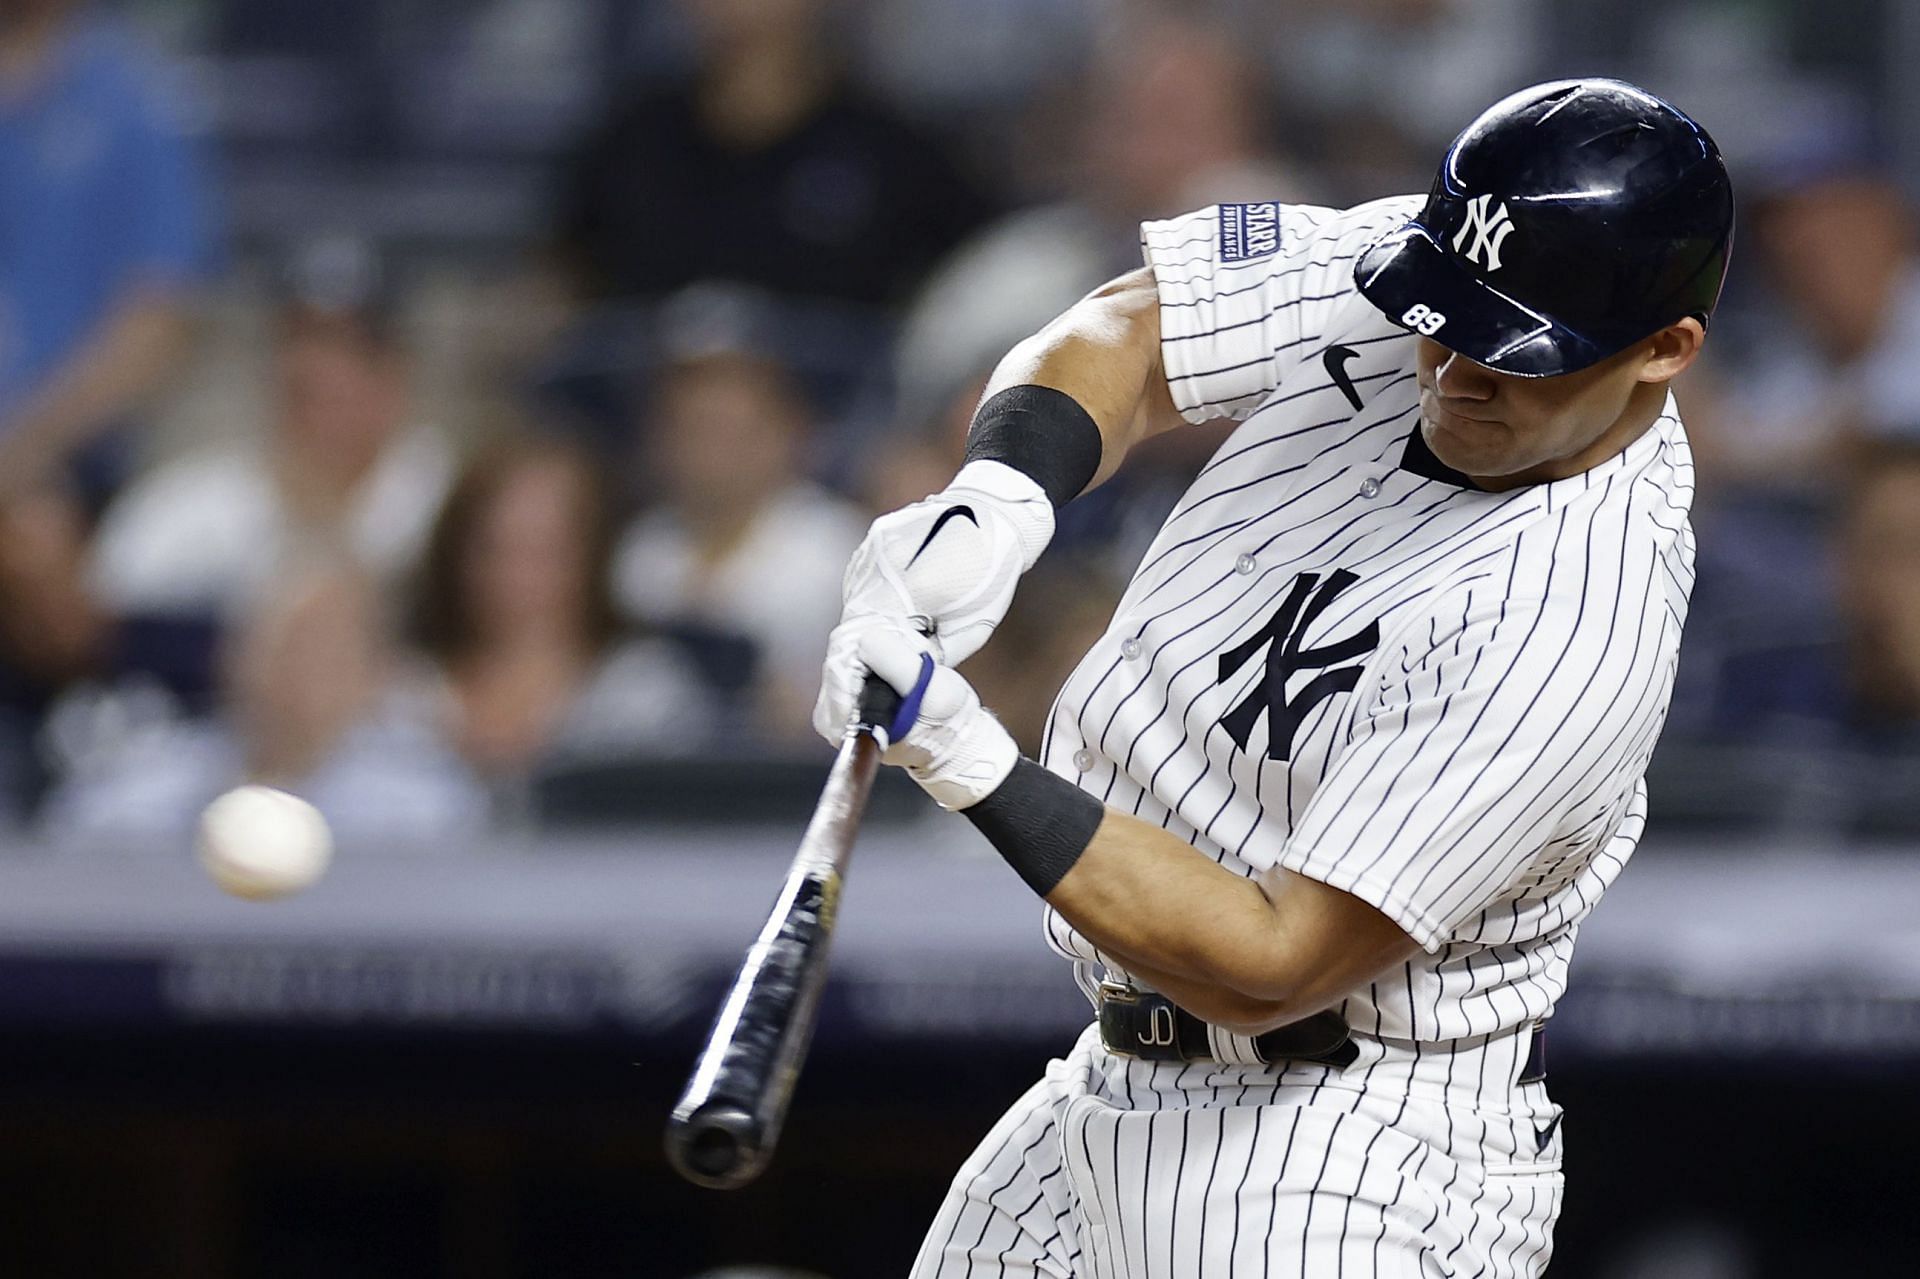 Jasson Dominguez's HR Spree Earns Dual Entry Into Yankees History